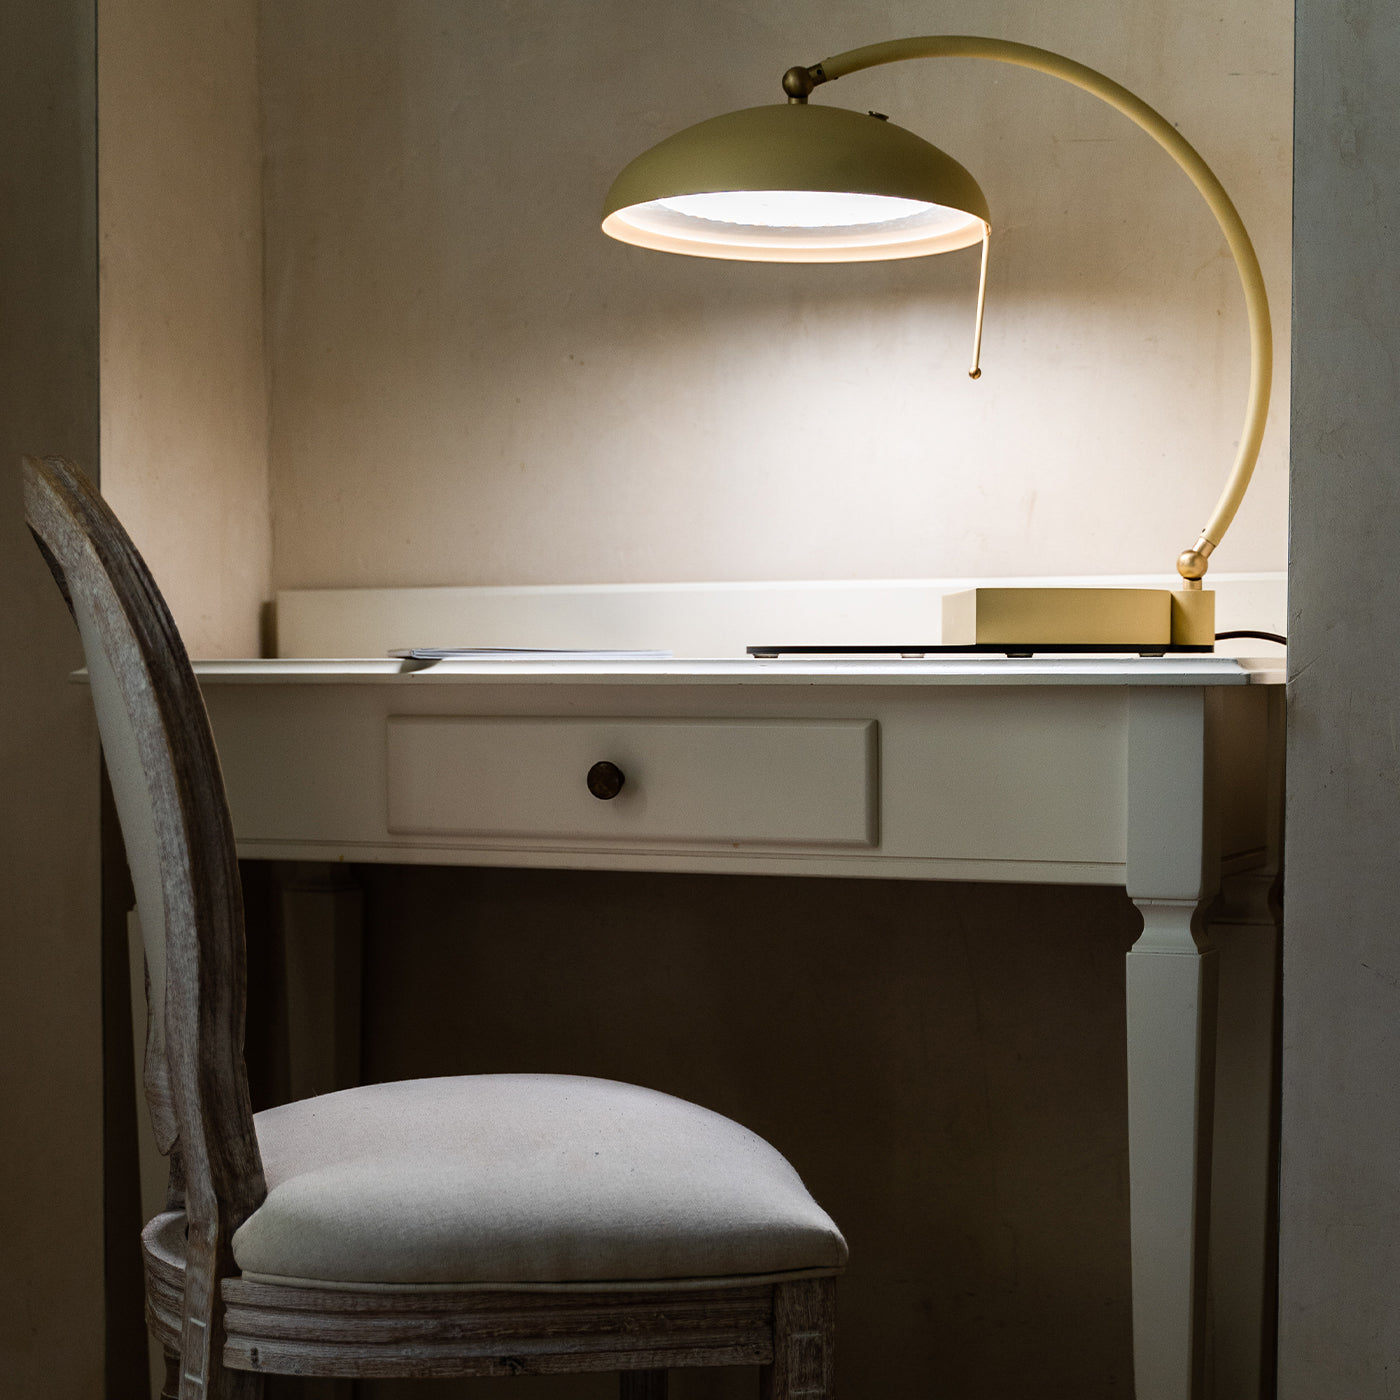 Serena Ministeriale Yellow Table Lamp - Alternative view 3